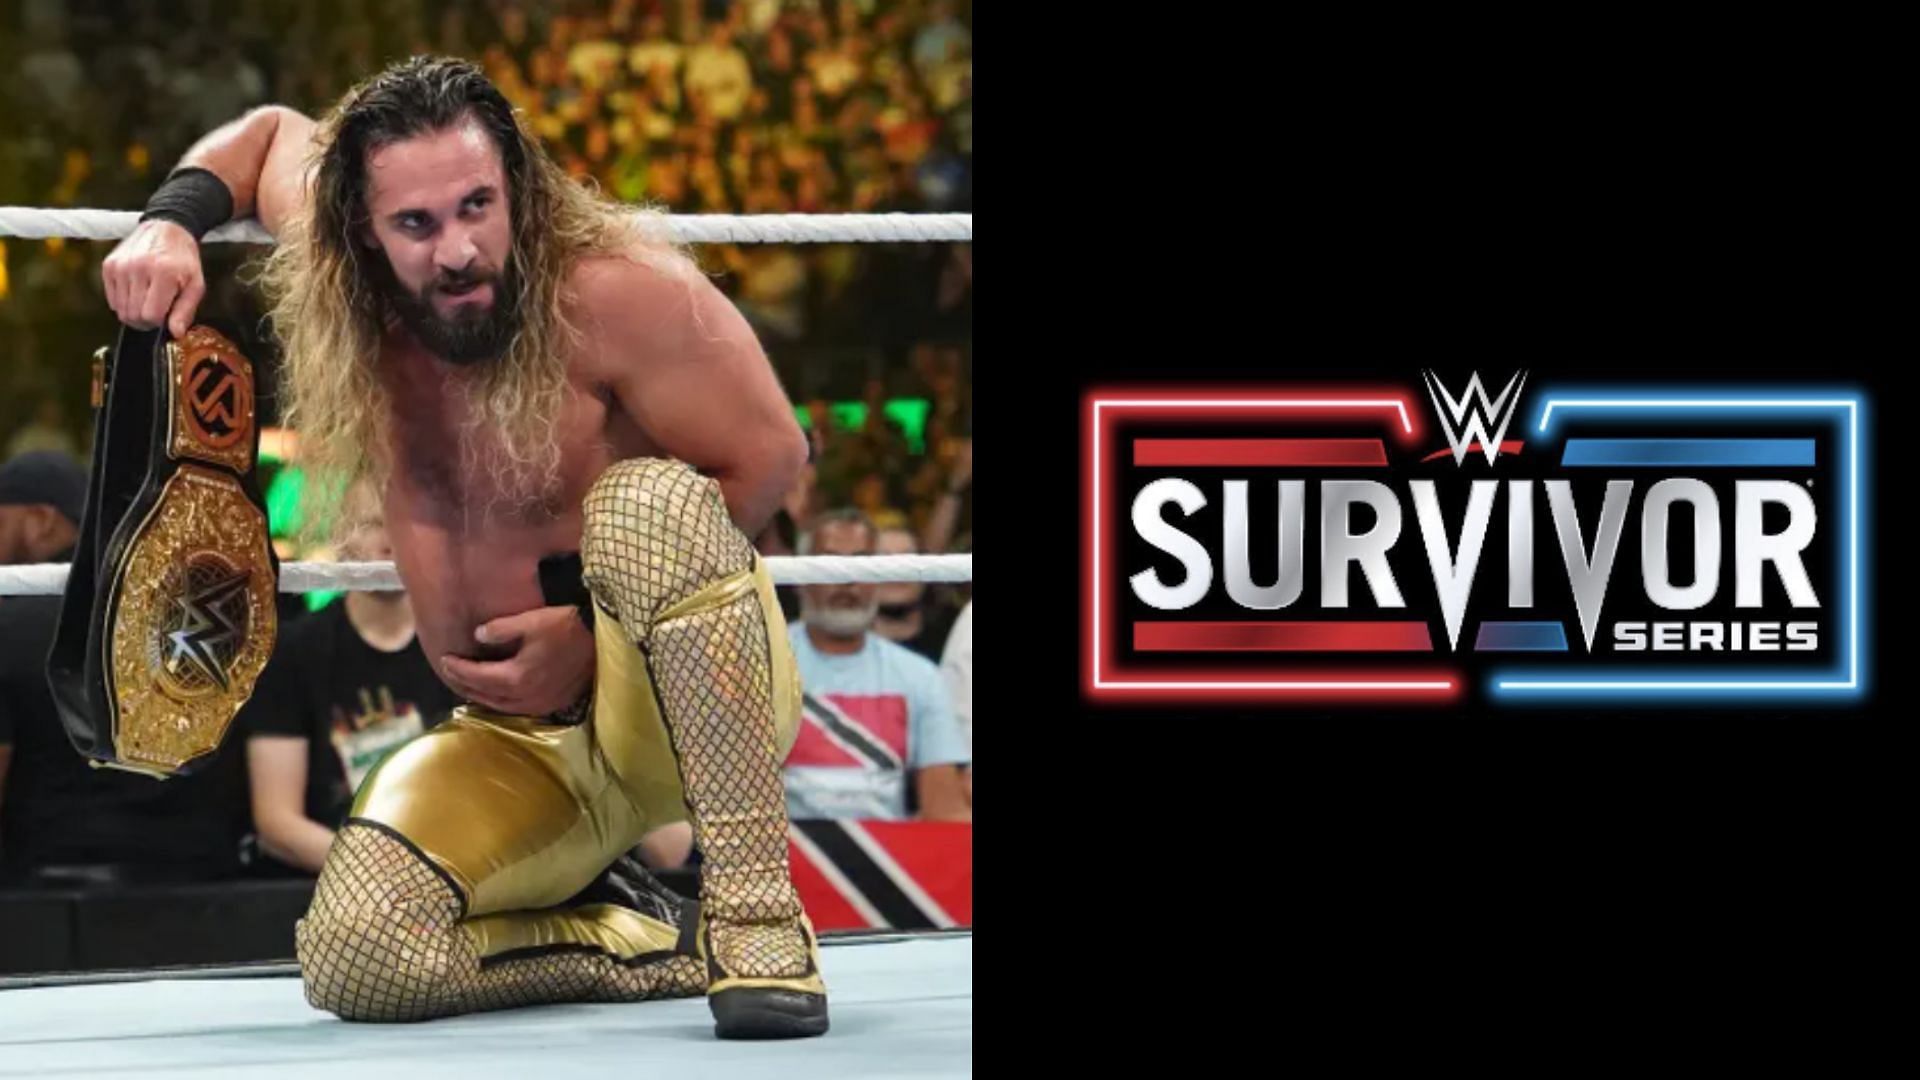 Seth Rollins is the current WWE World Heavyweight Champion